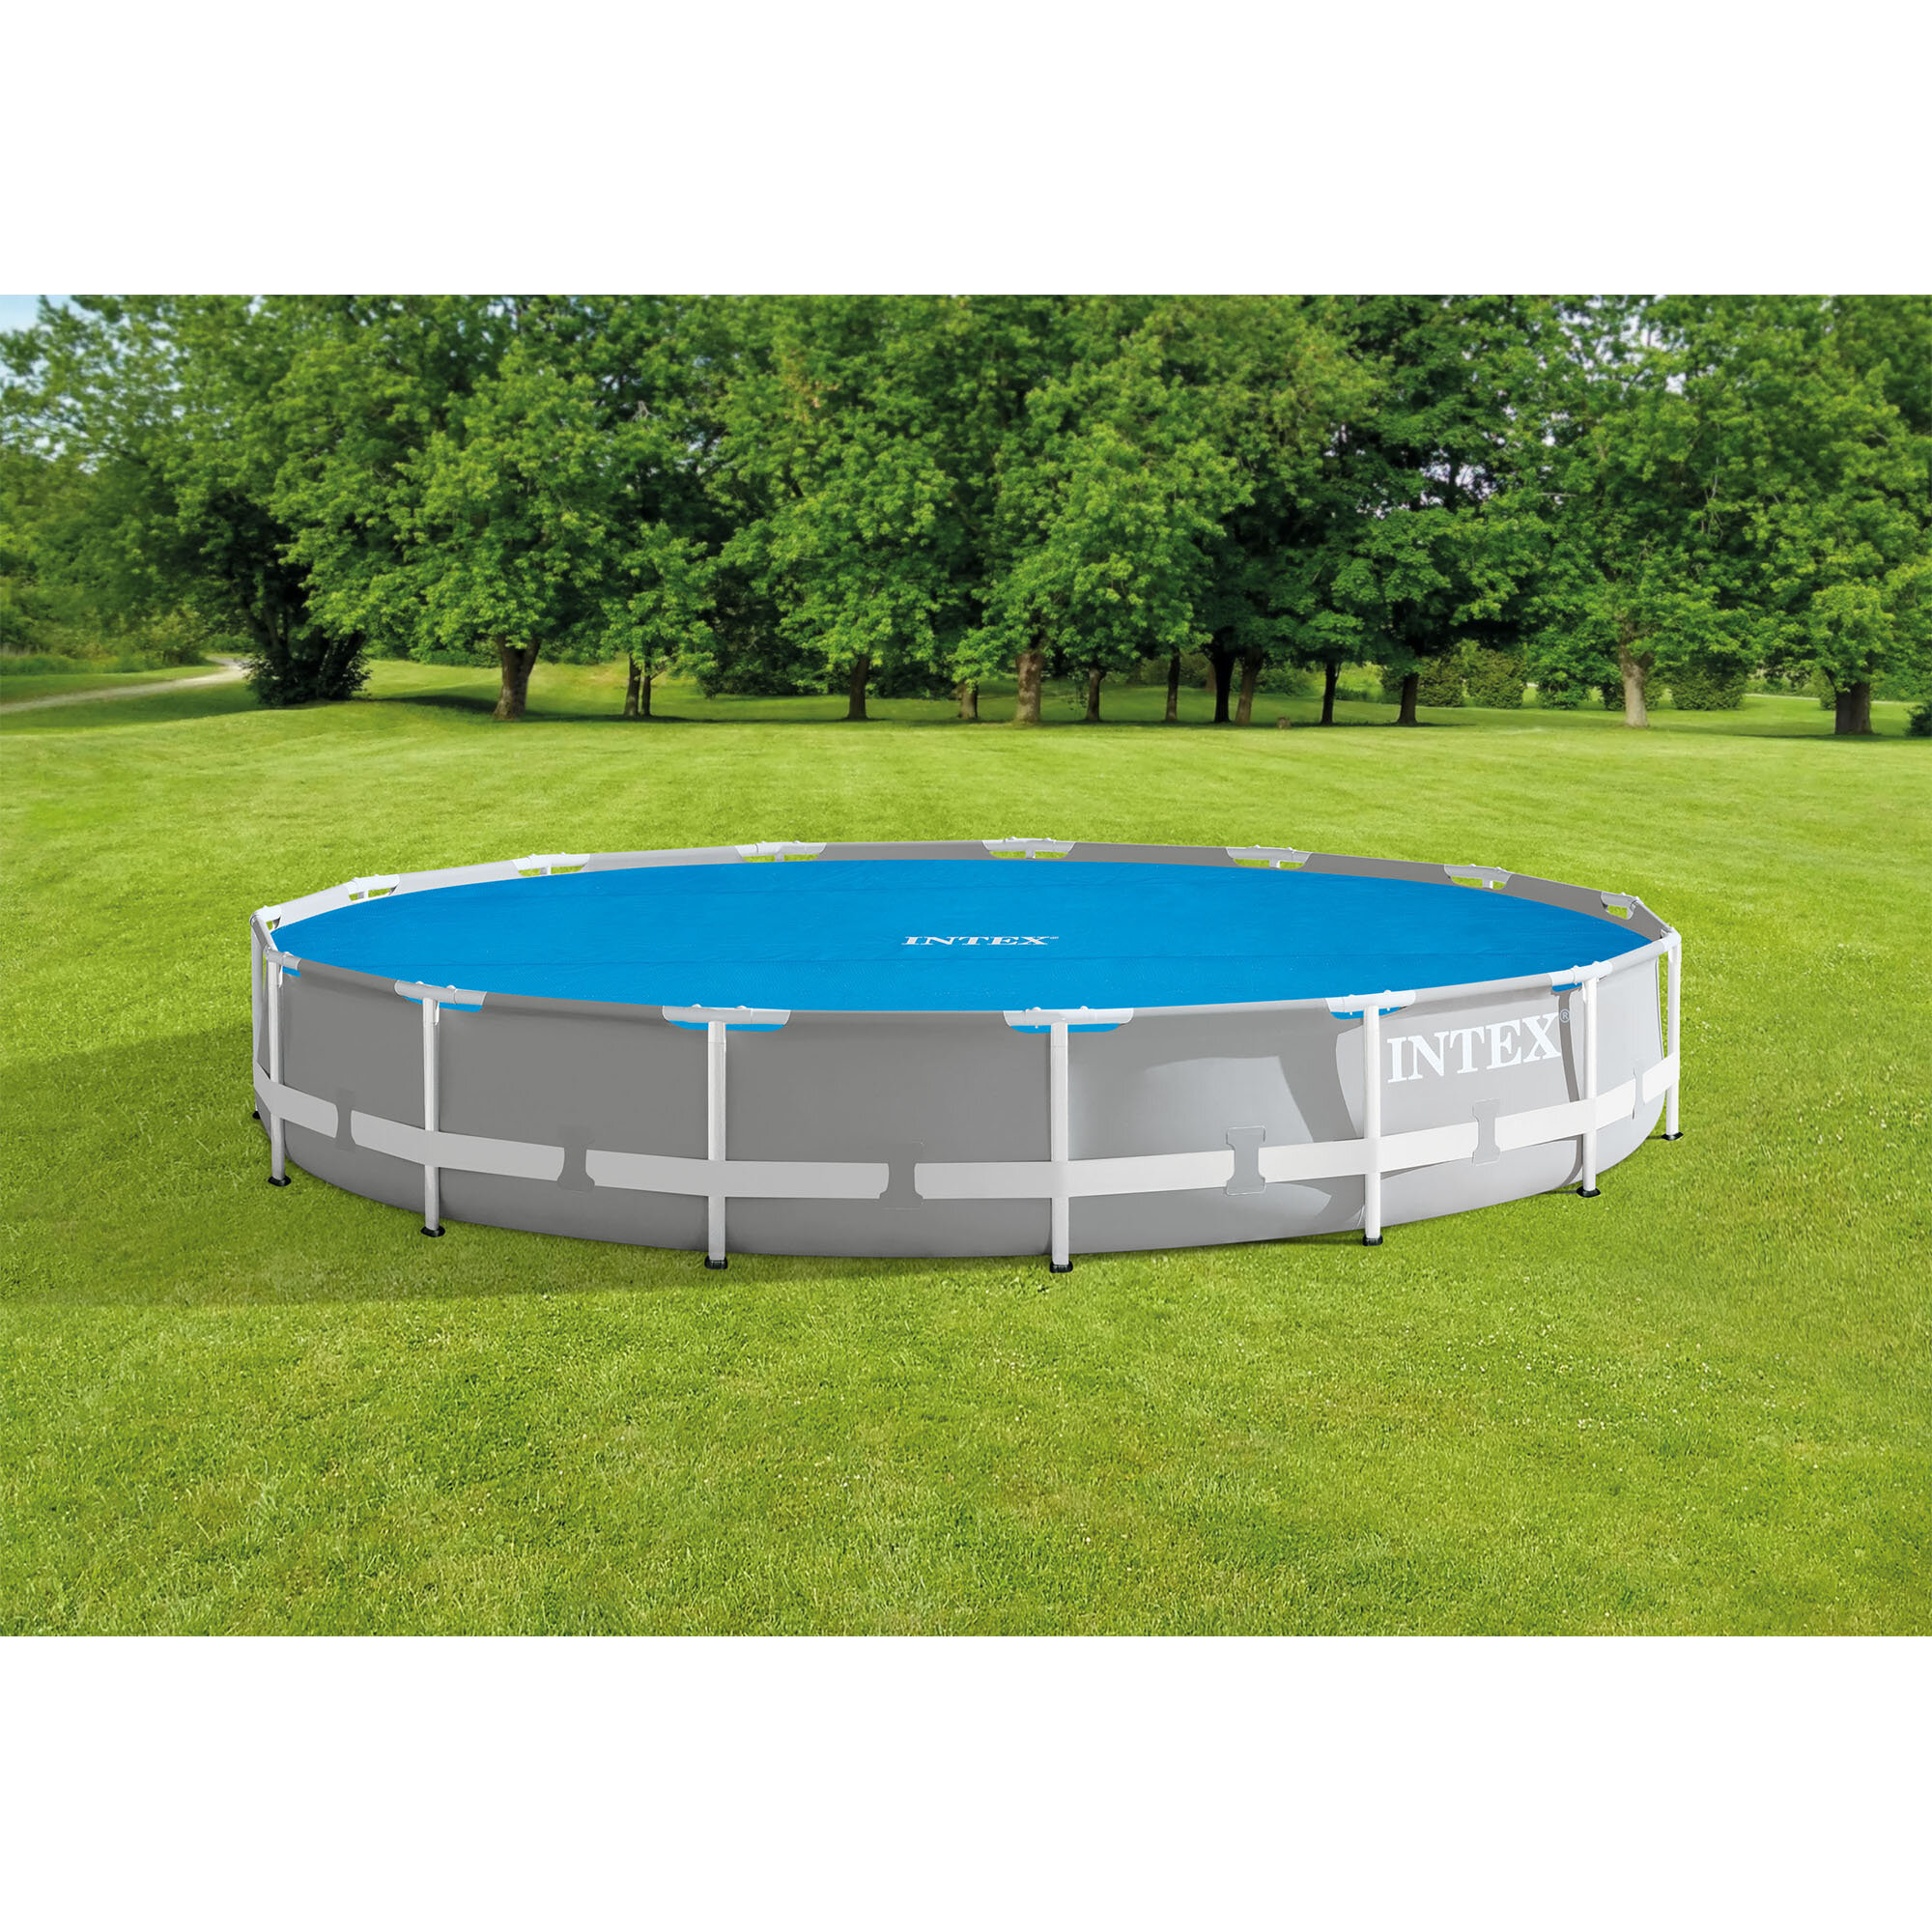 INTEX SOLAR POOL COVER FOR UPTO 16FT POOLS SEE DESCRIPTION FOR DETAILS 